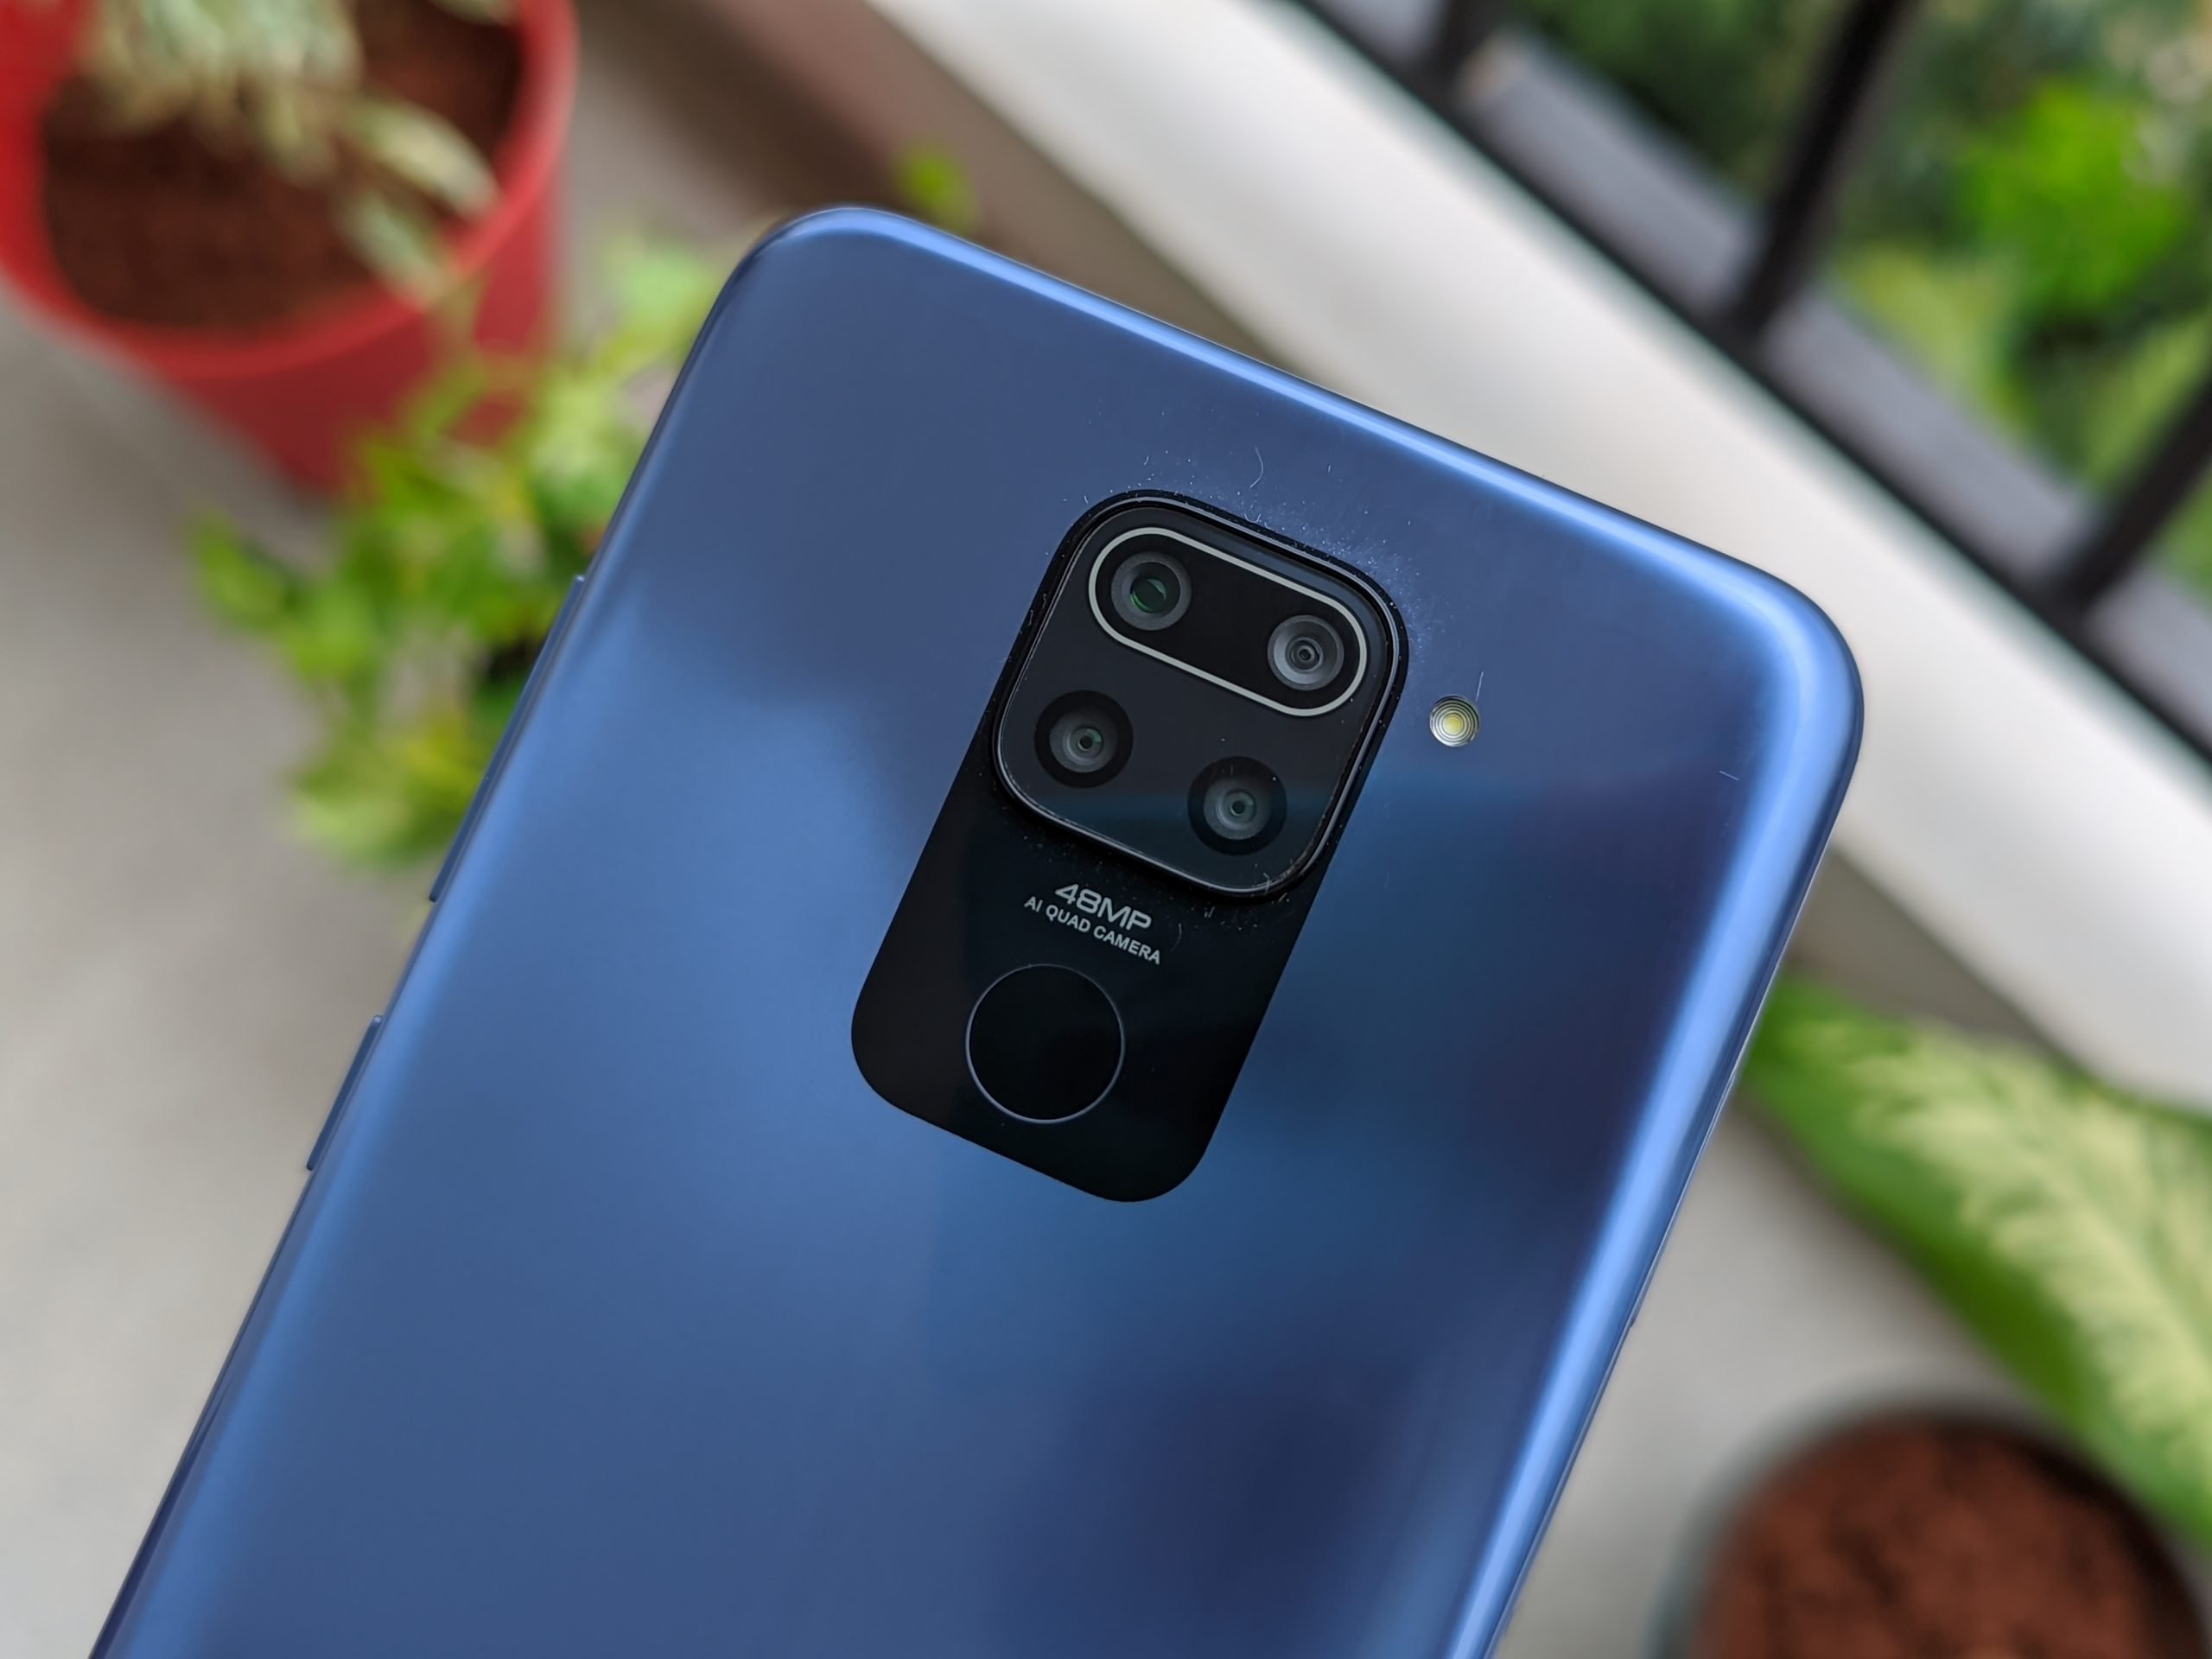 How Redmi 9 Prime is different from other smartphones?